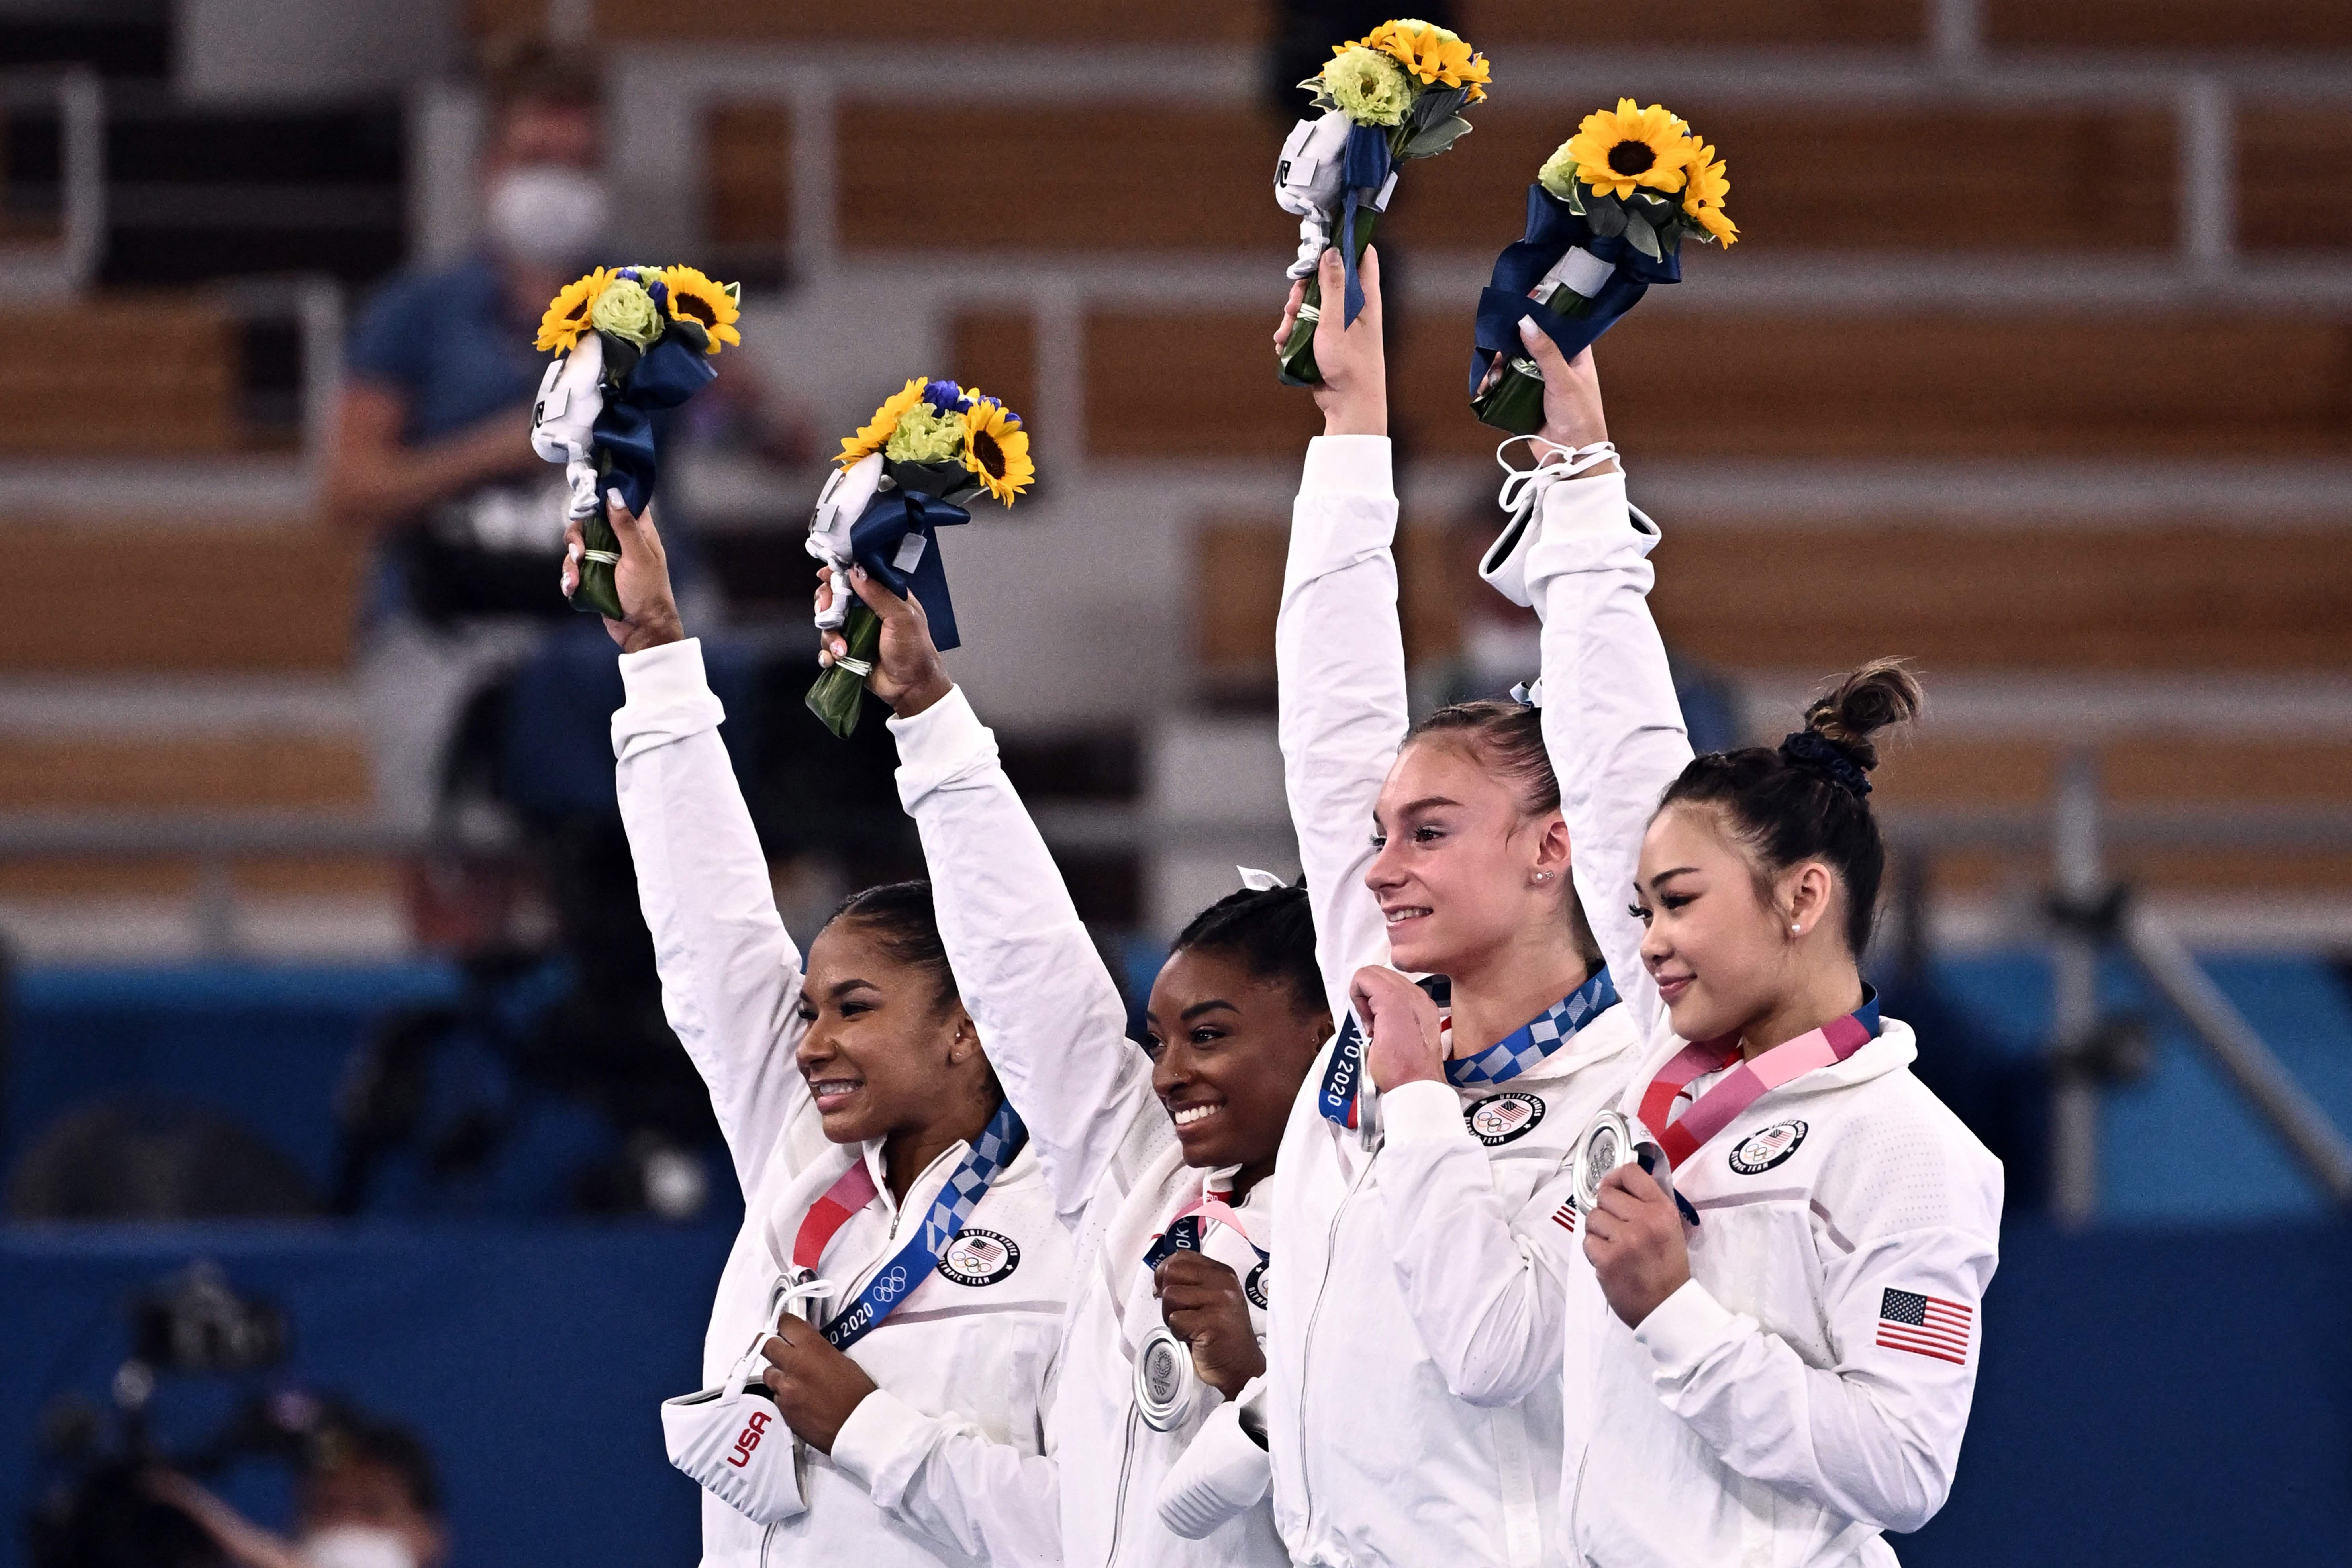 The four gymnasts stand in a row smiling on the podium. Each holds her bouquet up high with one hand and her silver medal around her neck with the other hand.